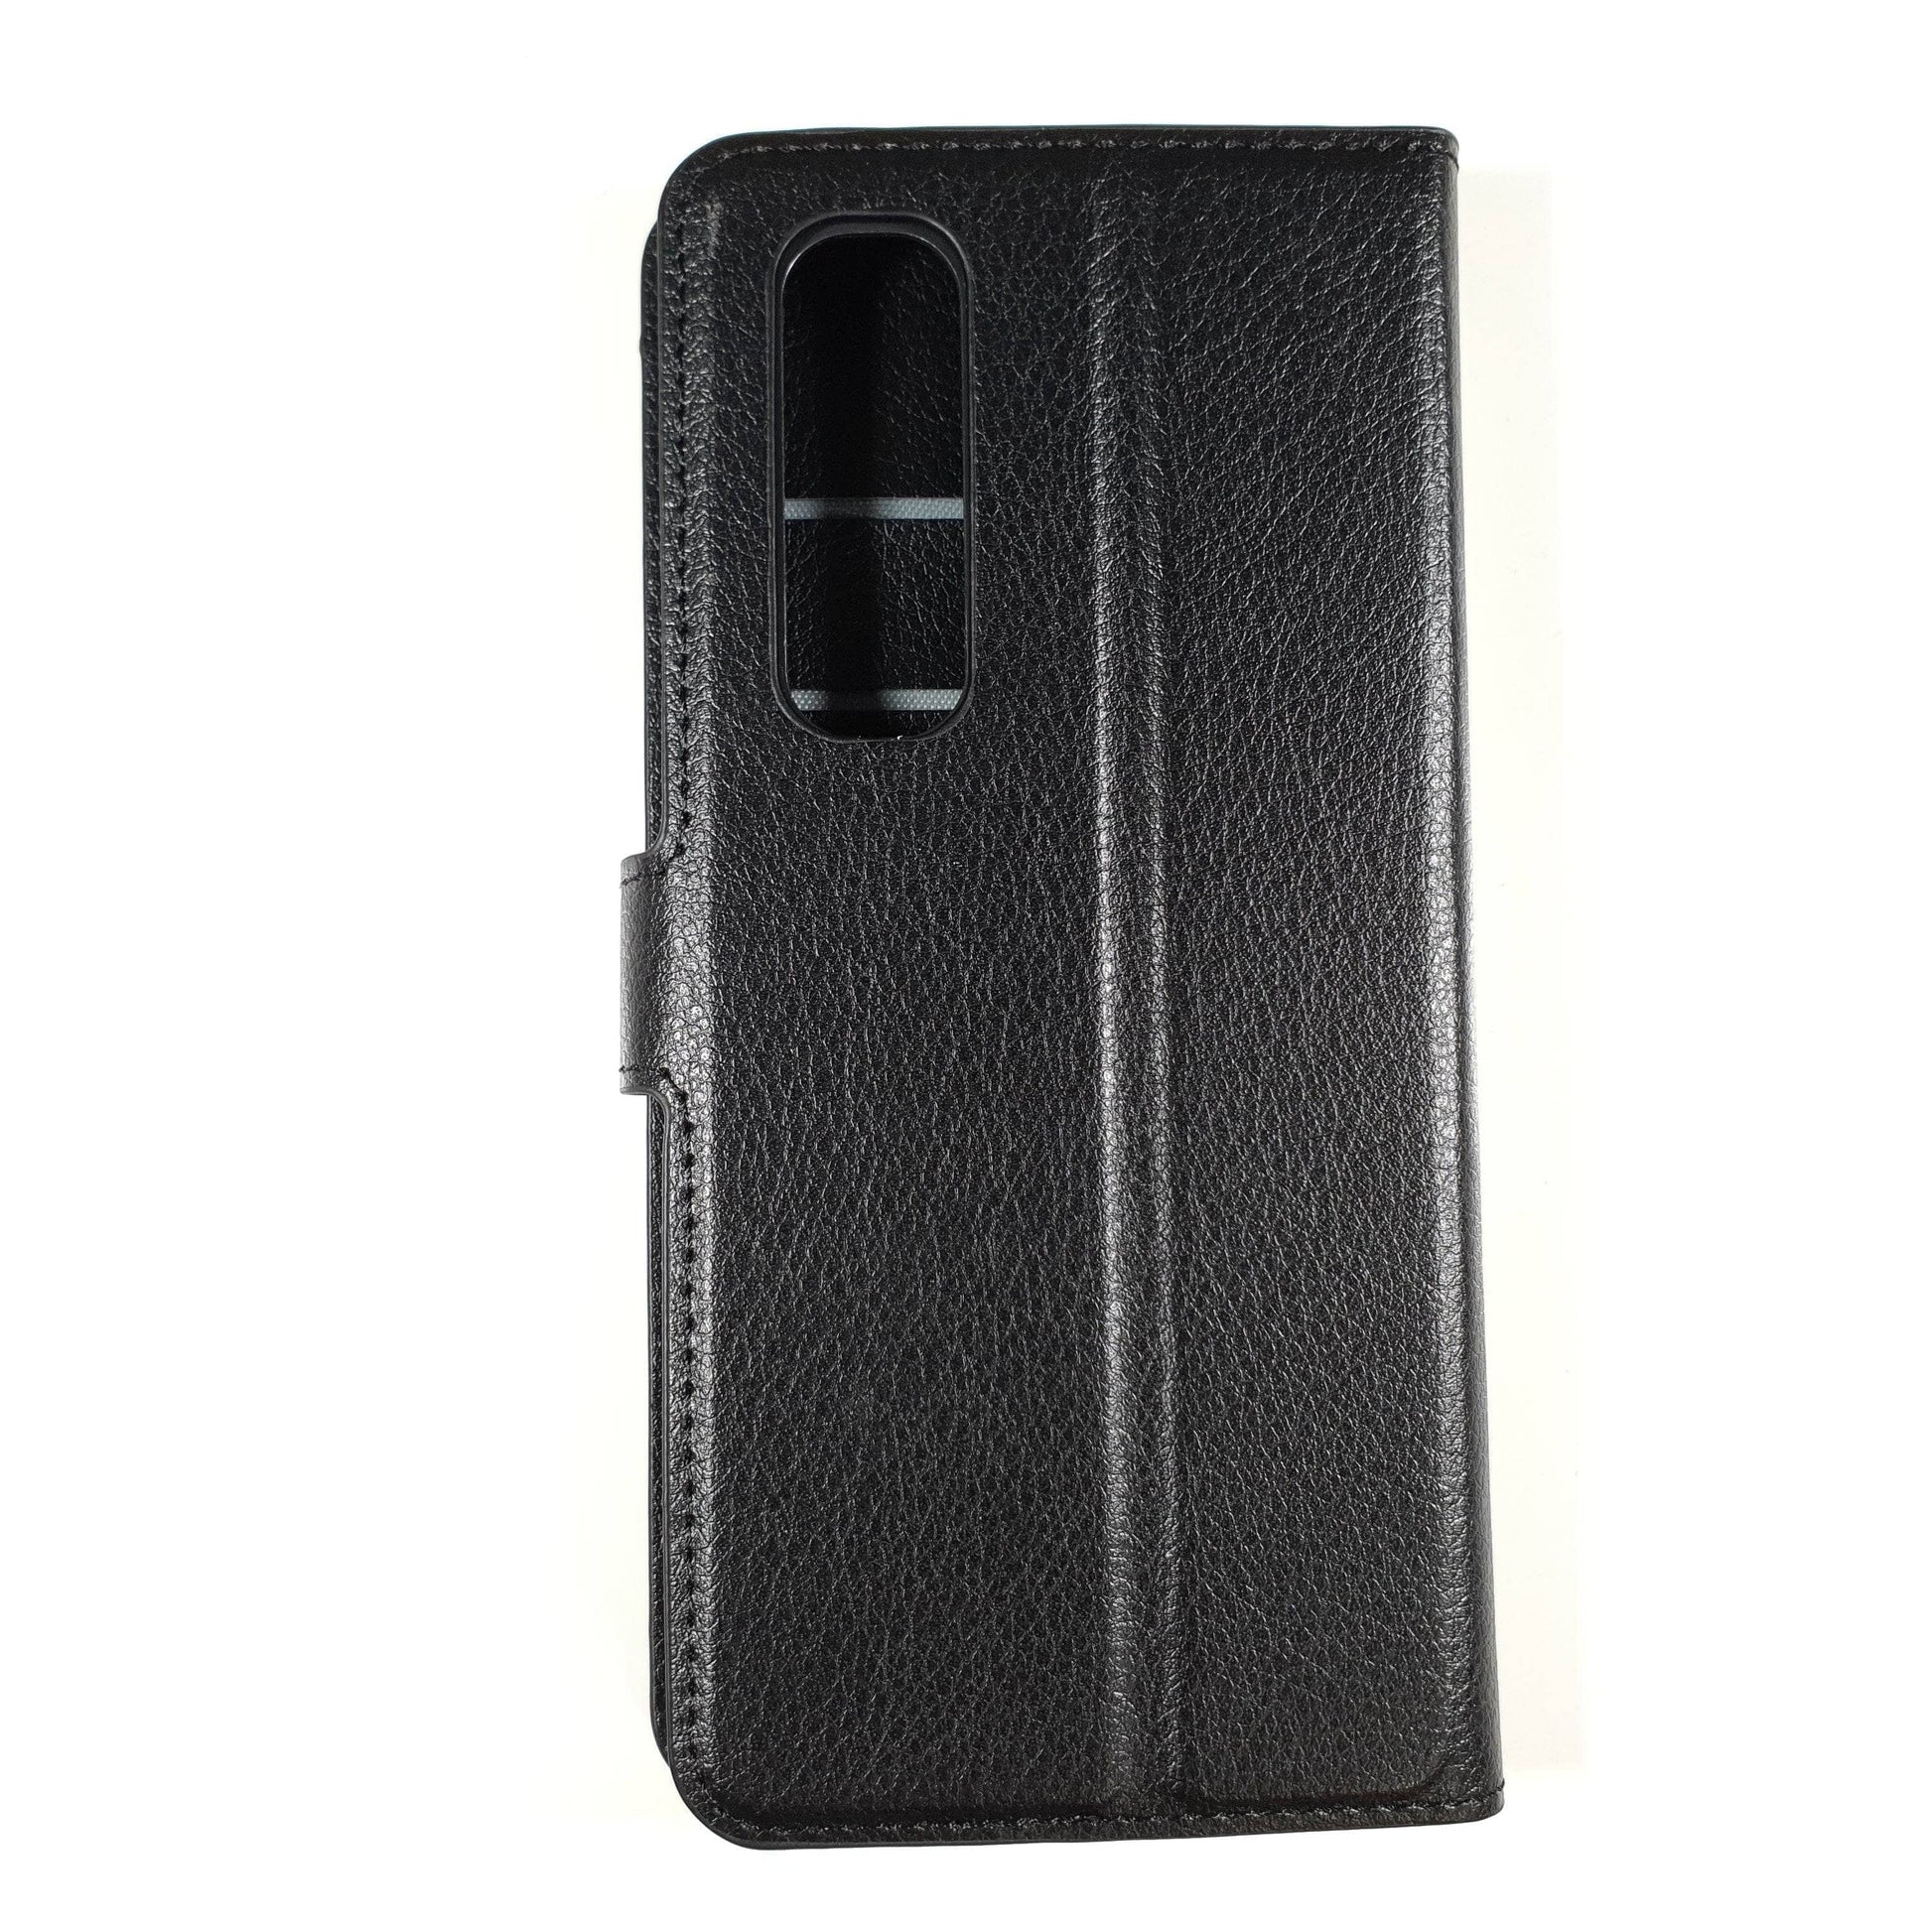 Blacktech Black Wallet Case Folio for OPPO Find X2 Pro NEO Lite with Pockets Cards-Phone Case-Blacktech-www.PhoneGuy.com.au